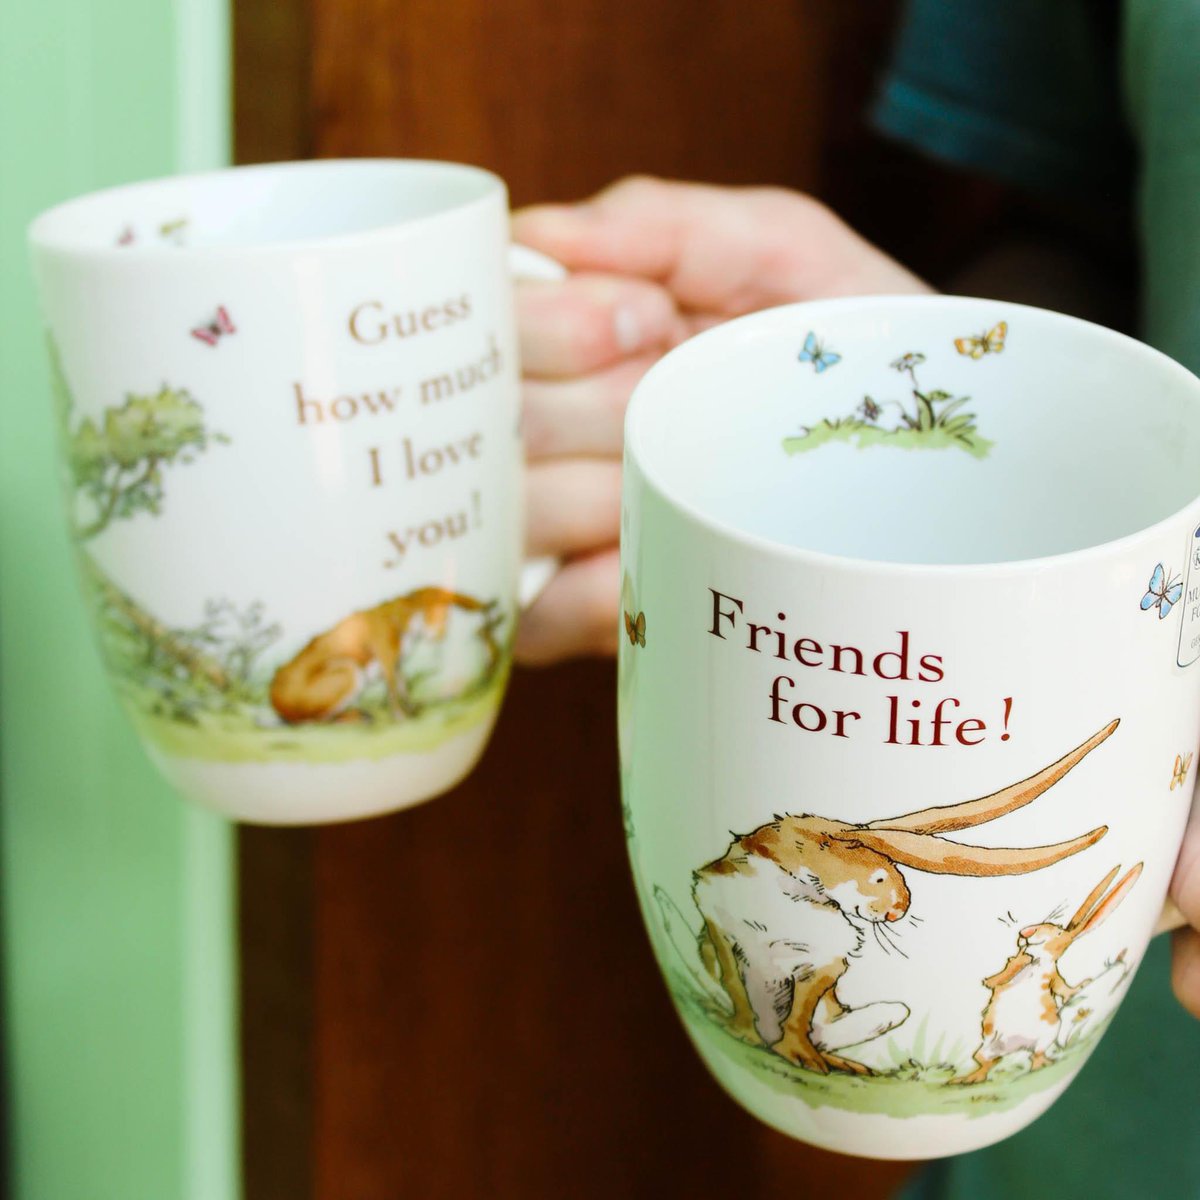 A cup of tea shared with a friend is happiness tasted and time well spent. 
🌿🌼☕️🫖🌼🌿
#FriendshipDay #NationalBestFriendsDay